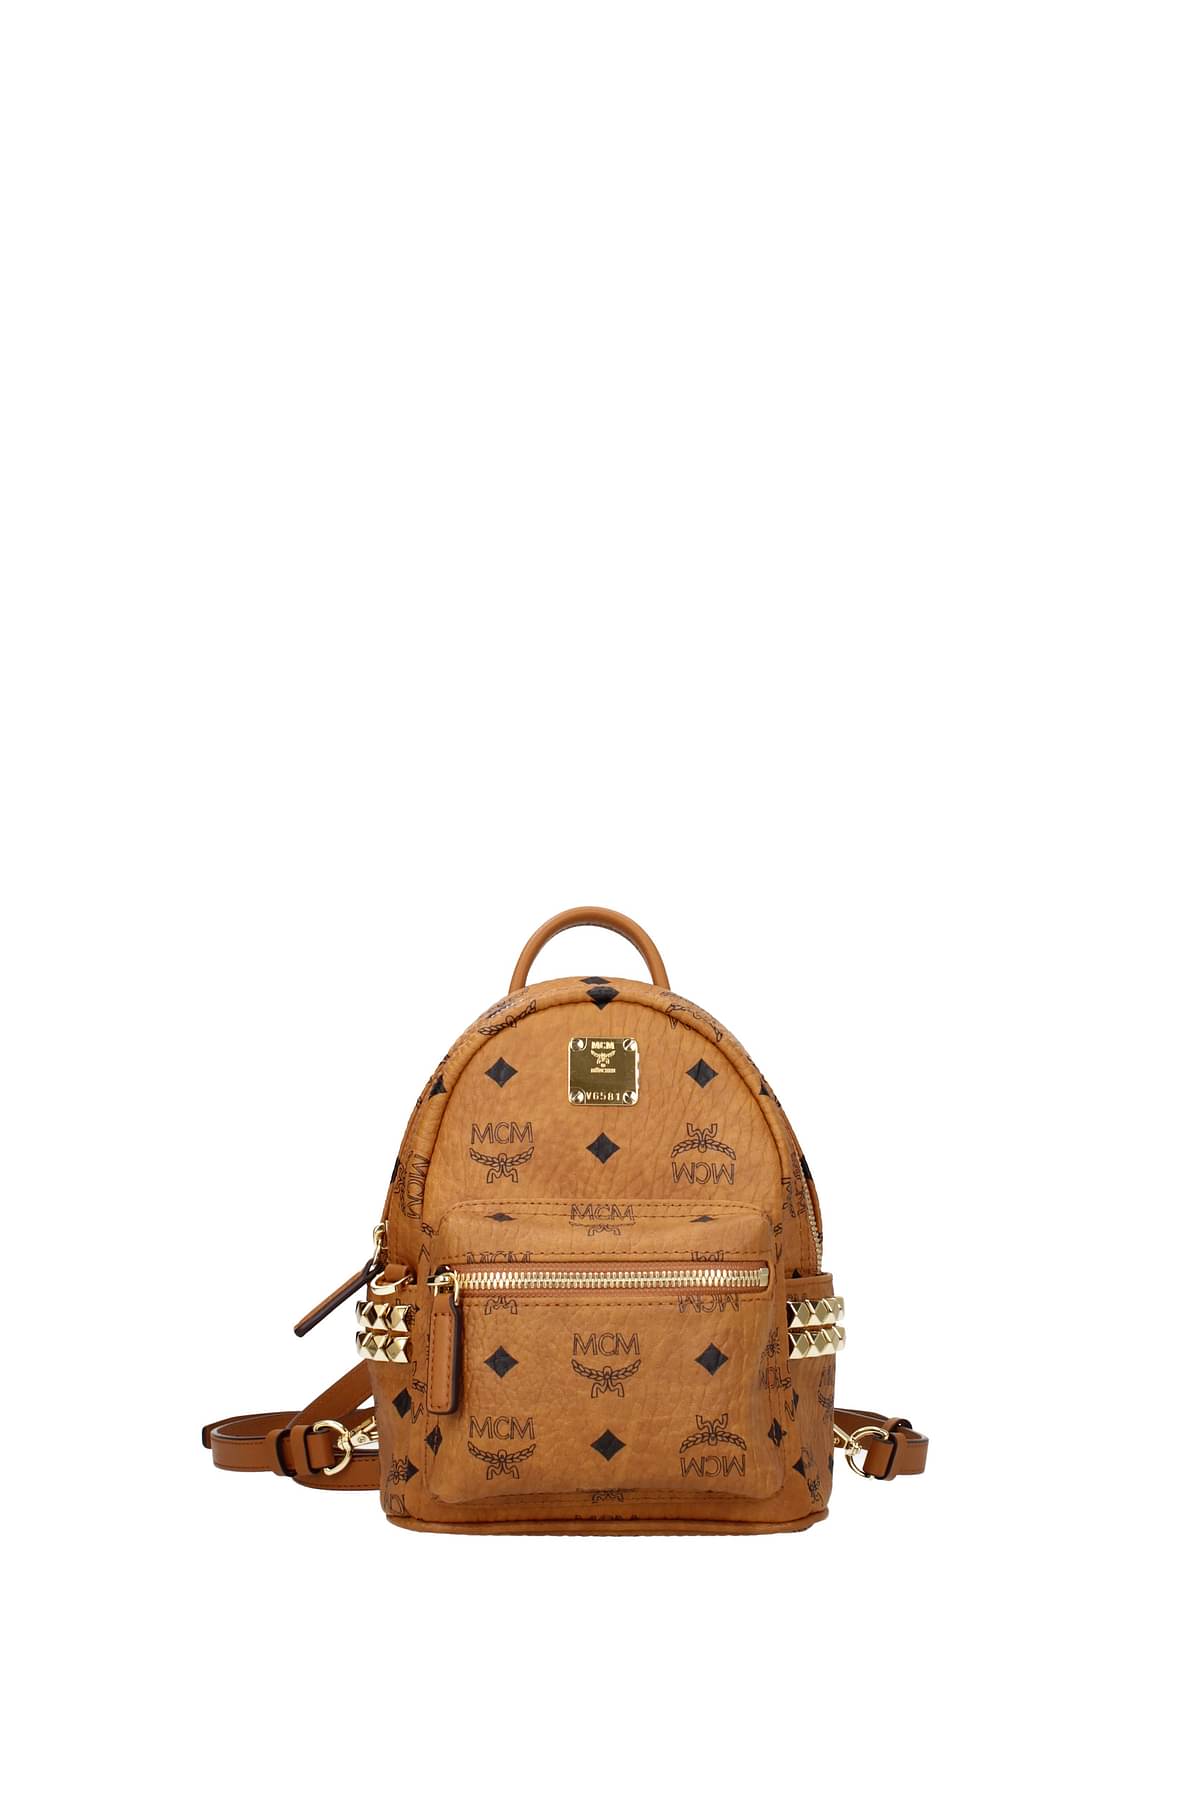 MCM Backpacks and bumbags stark Women MMKDSVE11CO Leather Brown Cognac 712€